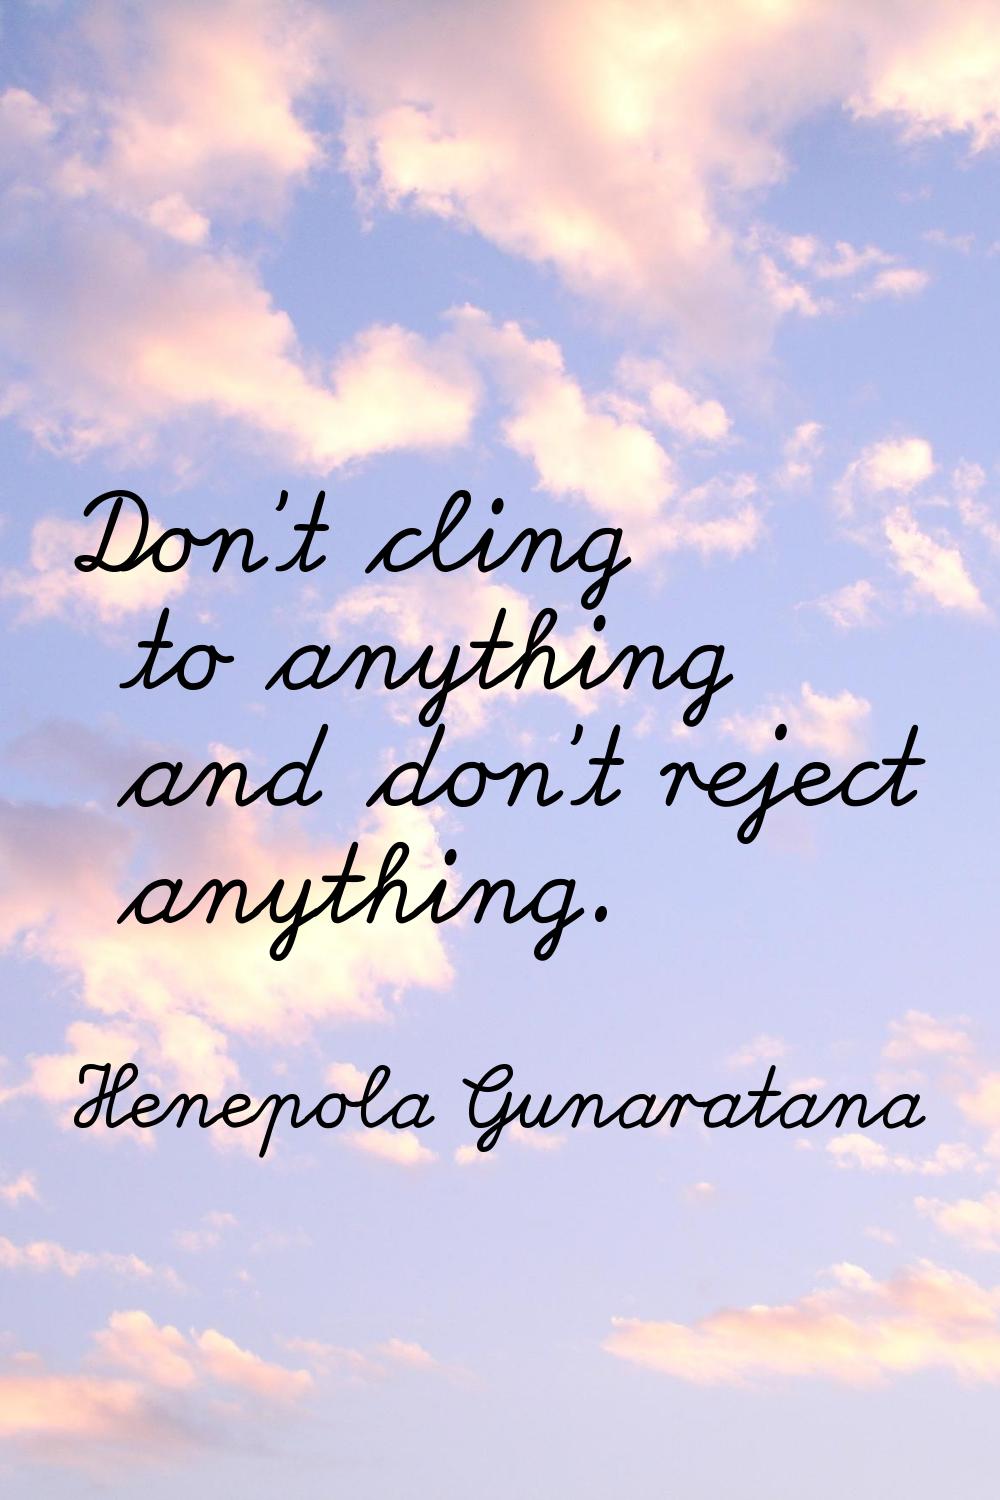 Don't cling to anything and don't reject anything.